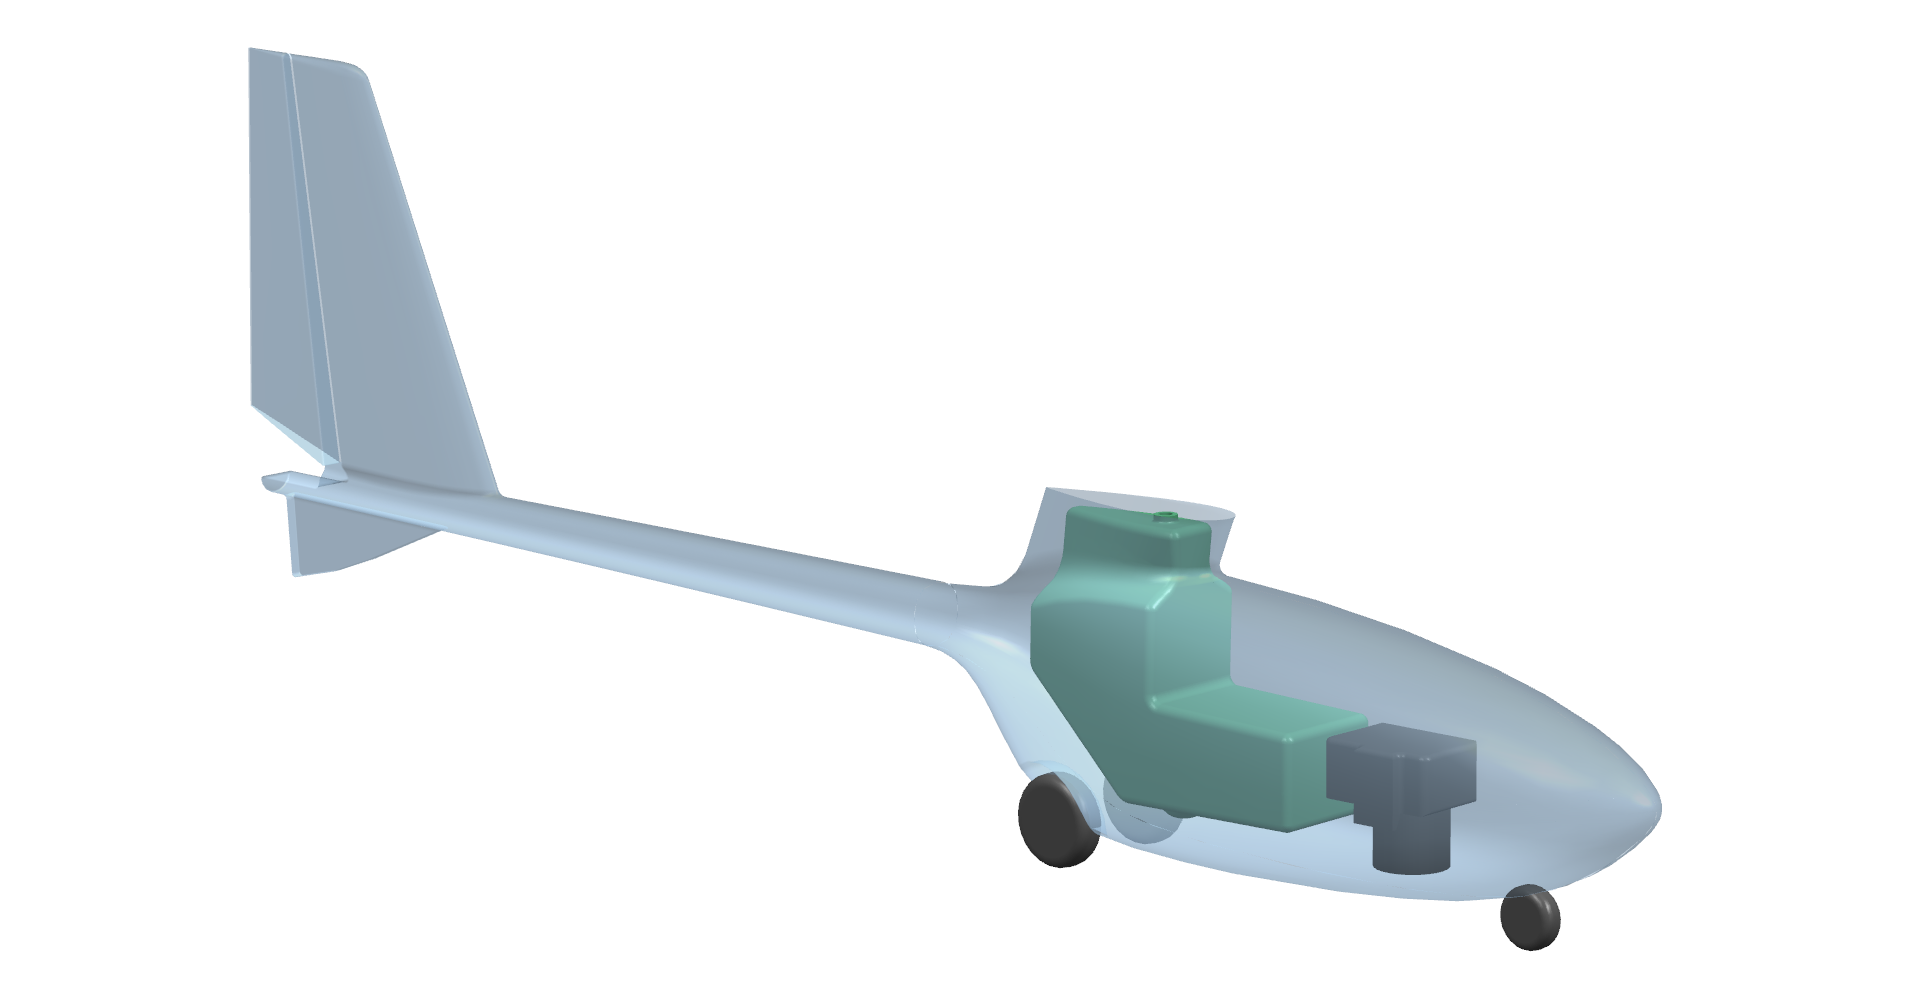 PW SuperZoom unmanned aircraft project